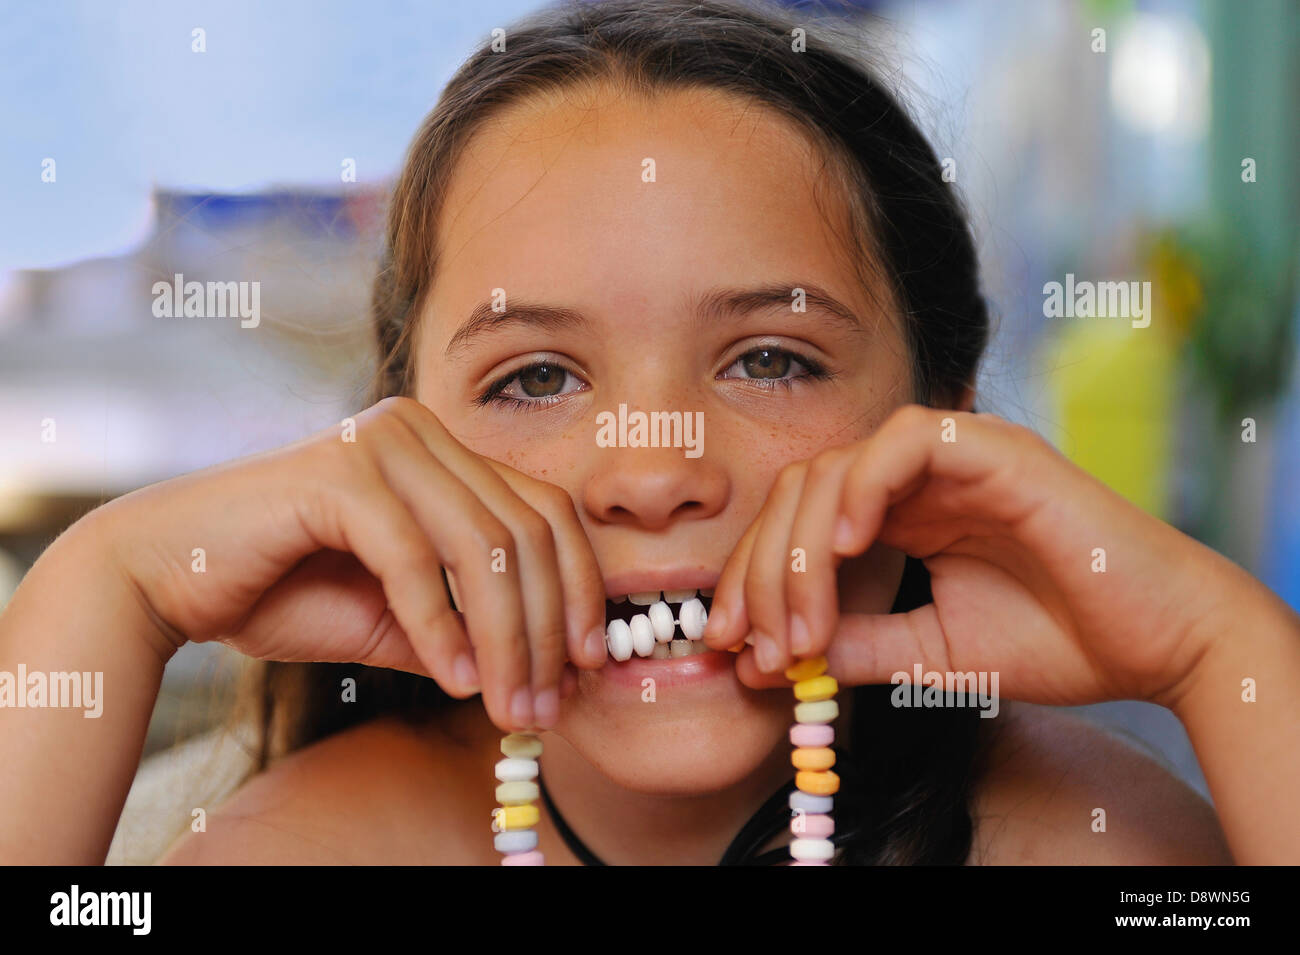 Young girl eating a candy neckless Stock Photo